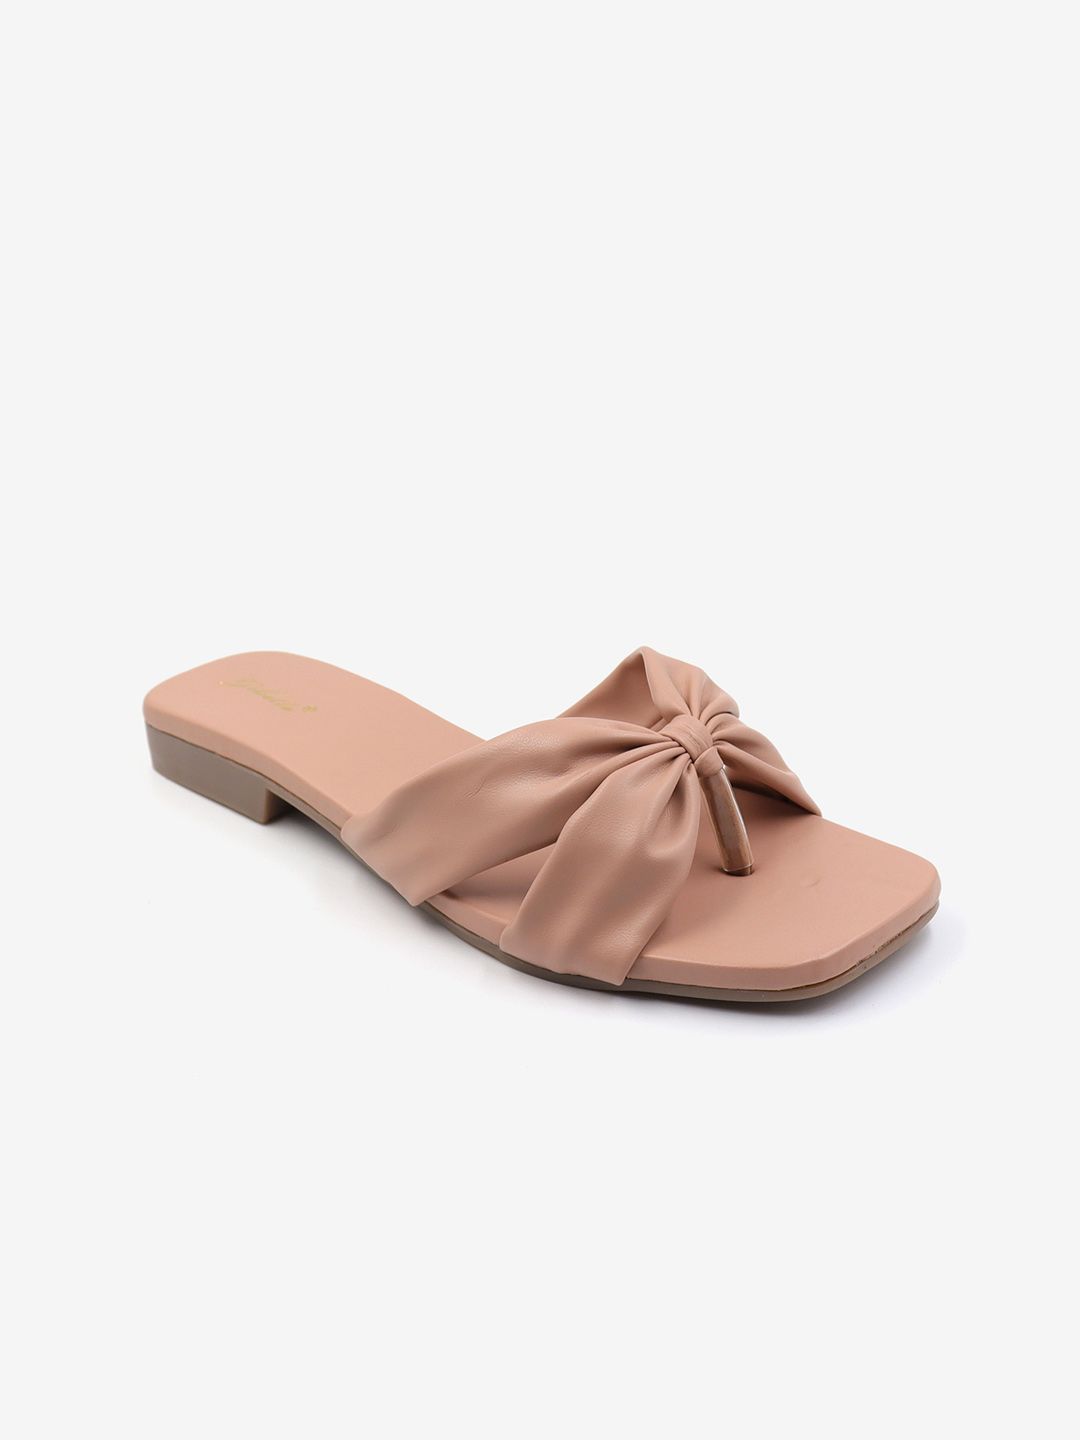 Gibelle Women Pink Open Toe Flats with Bows Price in India